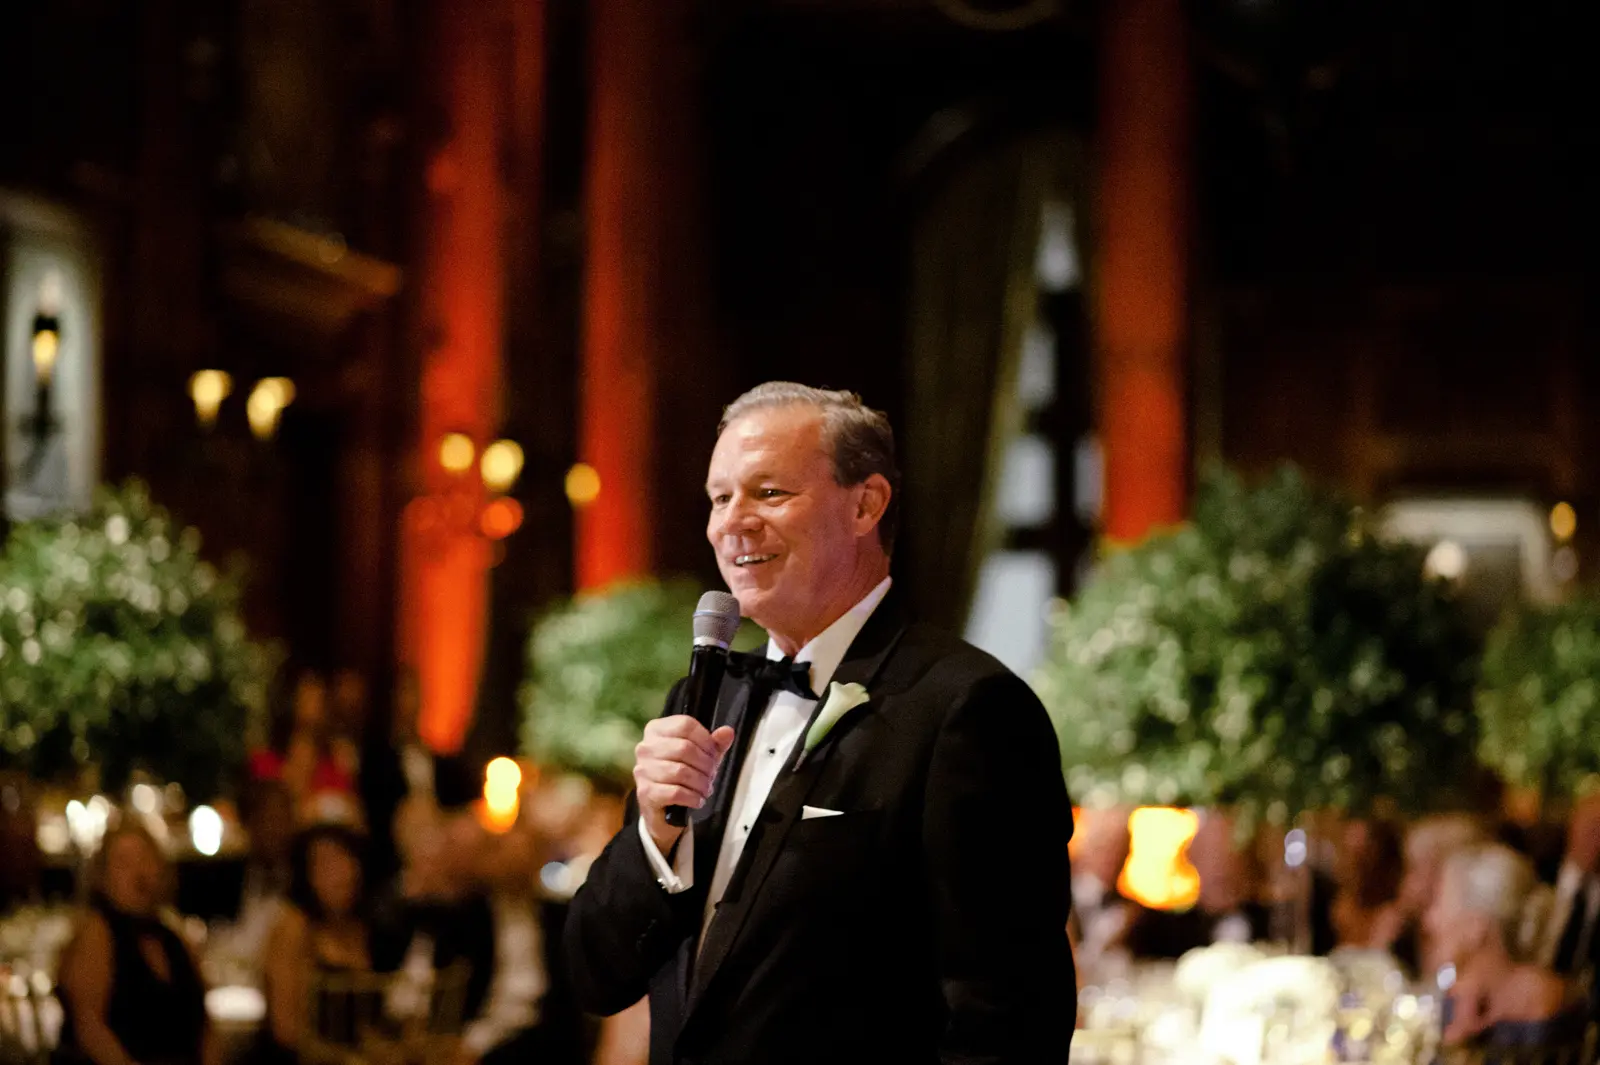 A man speaking in mike at the wedding event